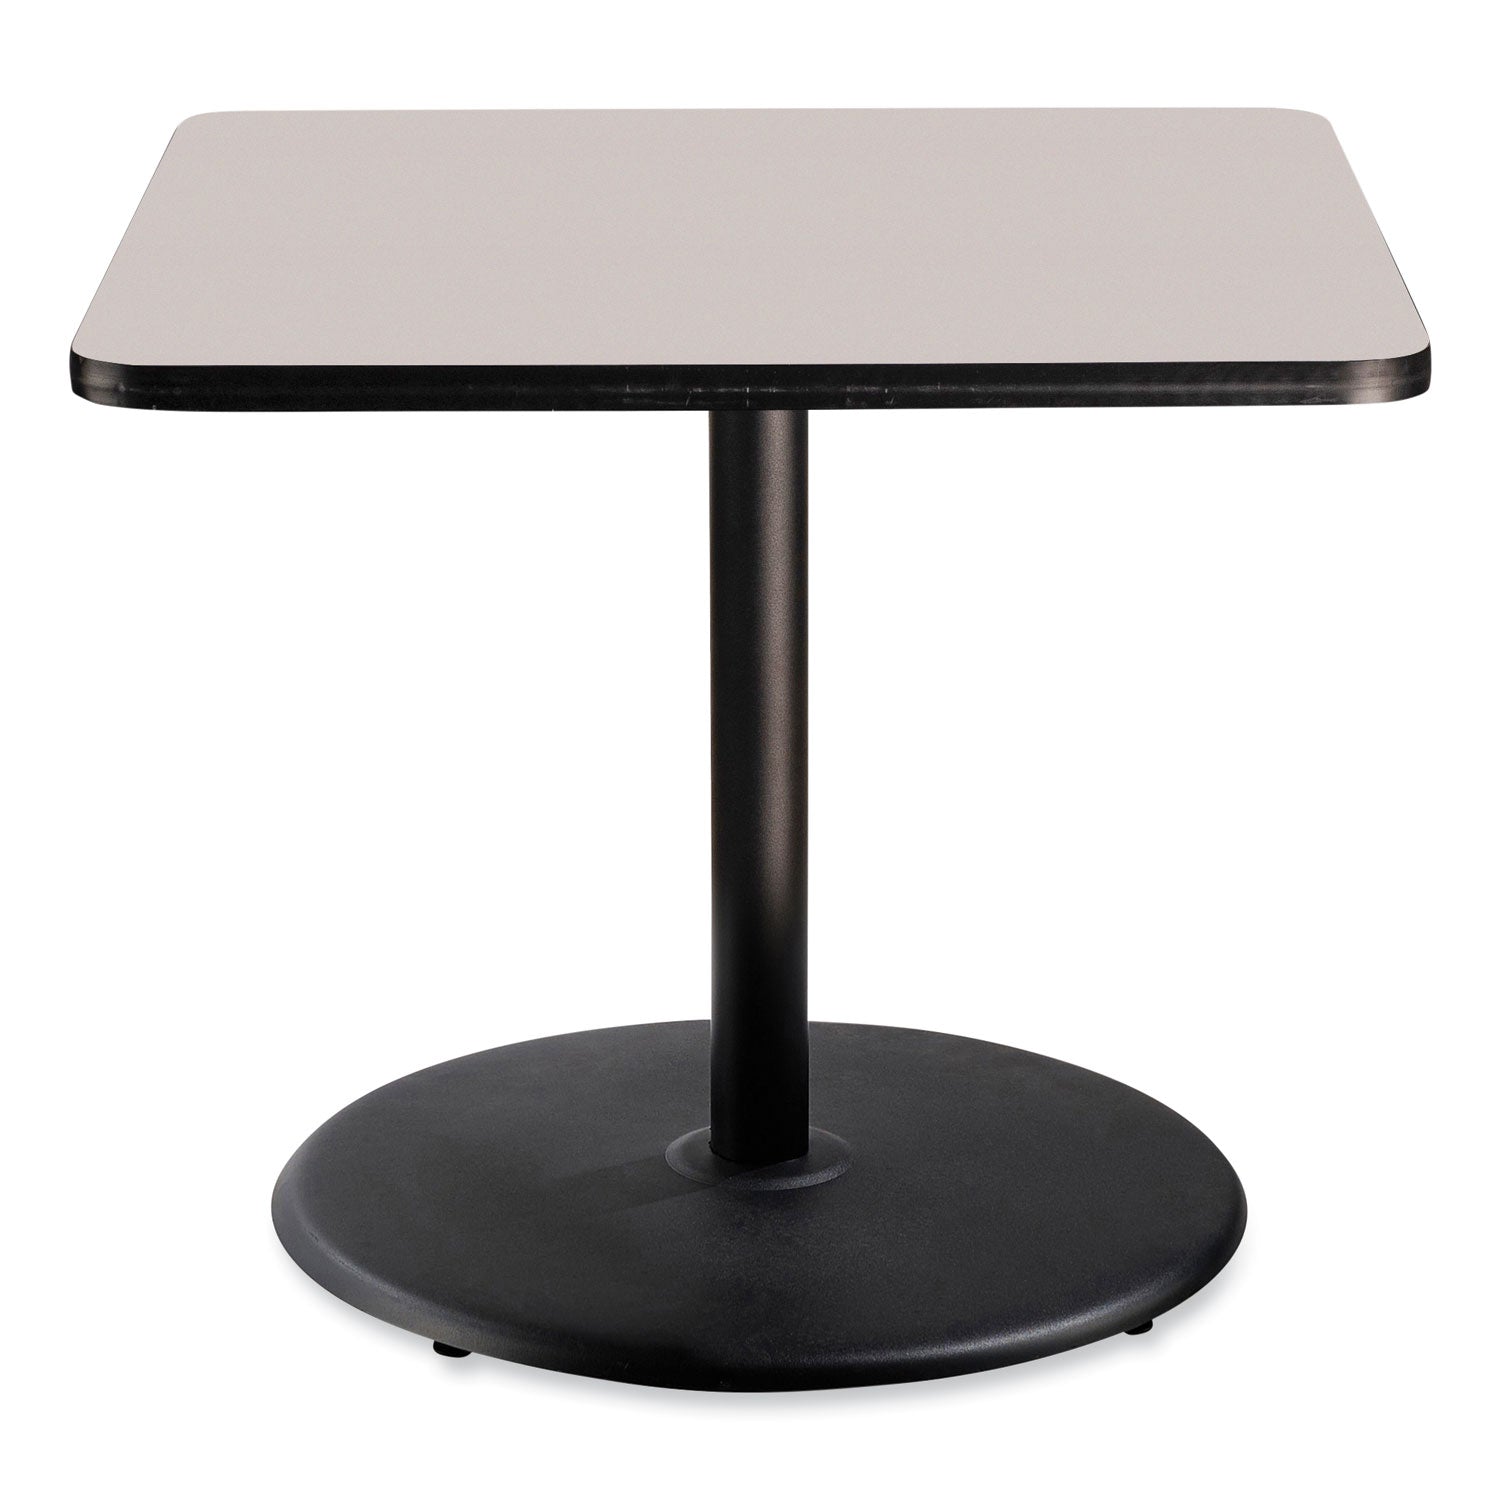 cafe-table-36w-x-36d-x-30h-square-top-round-base-gray-nebula-top-black-base-ships-in-7-10-business-days_npsct33636rd1gy - 2